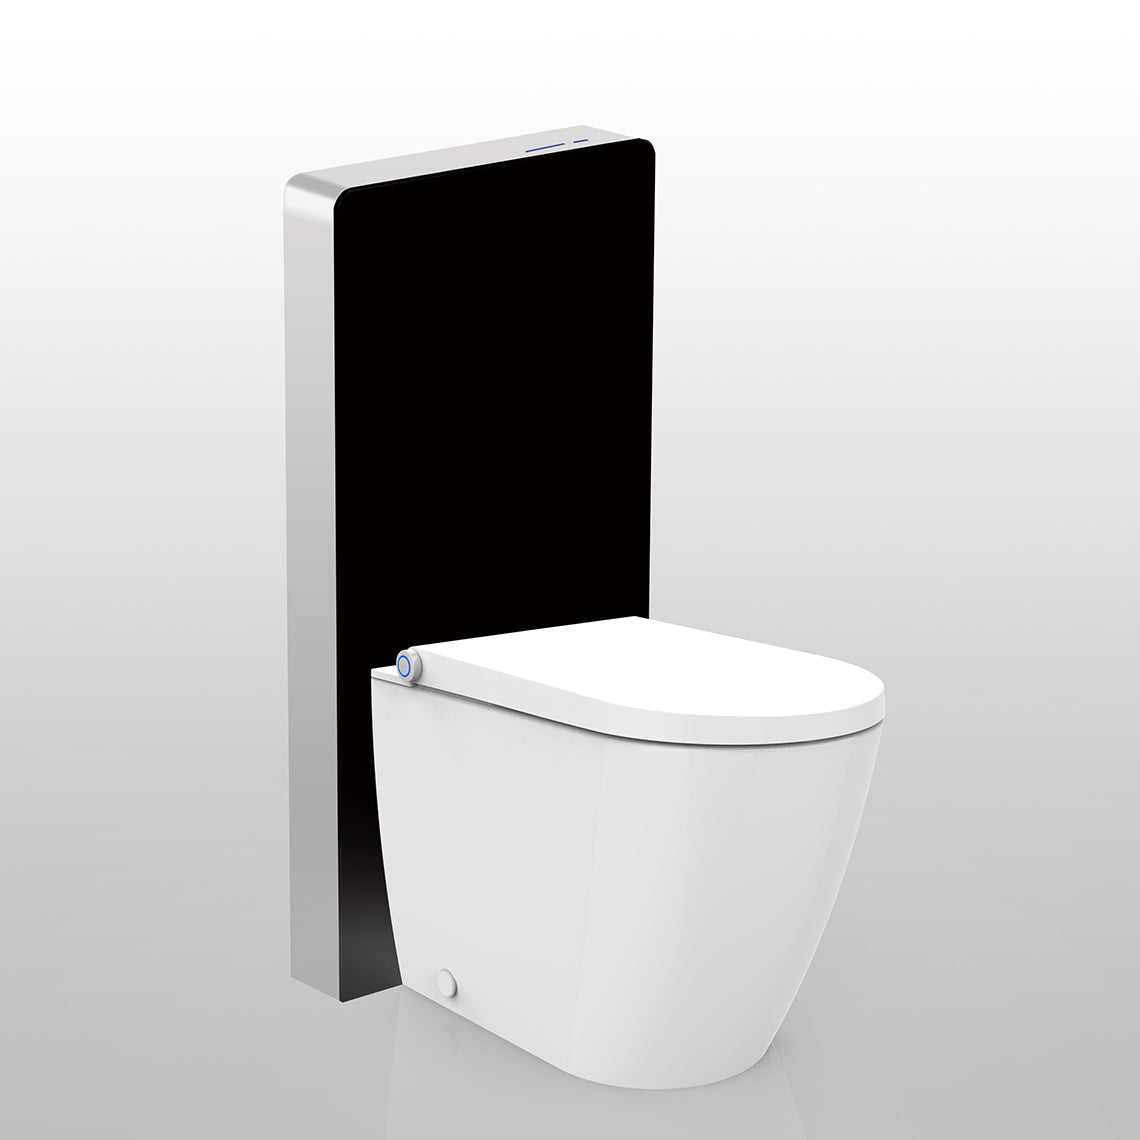 GALLARIA BLACK ALTARETROFIT RIMLESS WALL FACE PAN AND REMOTE WASHLET PACKAGE GLOSS WHITE